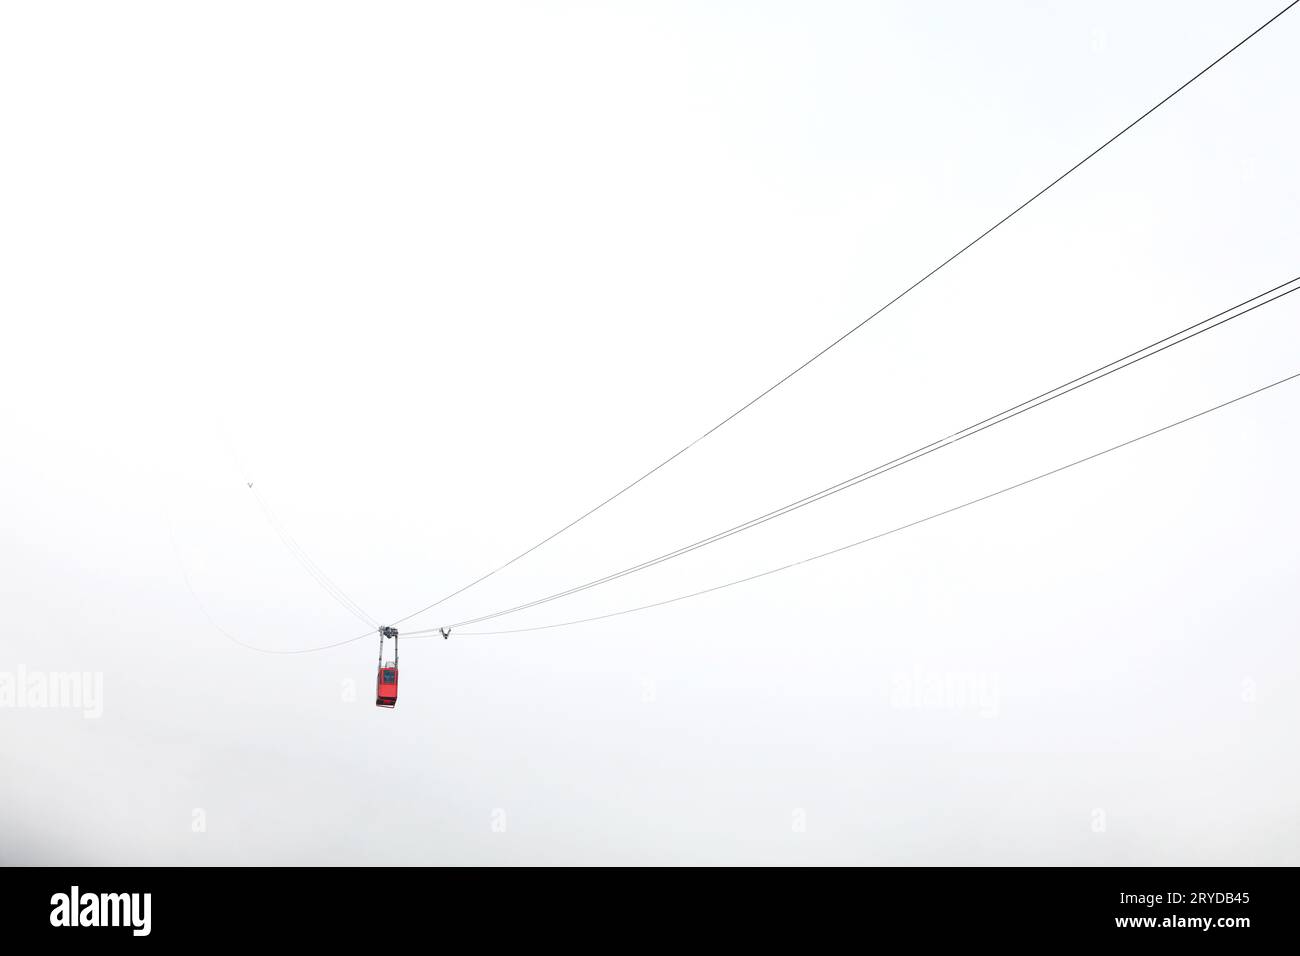 Red mountain cableway car in clouds and fog Stock Photo